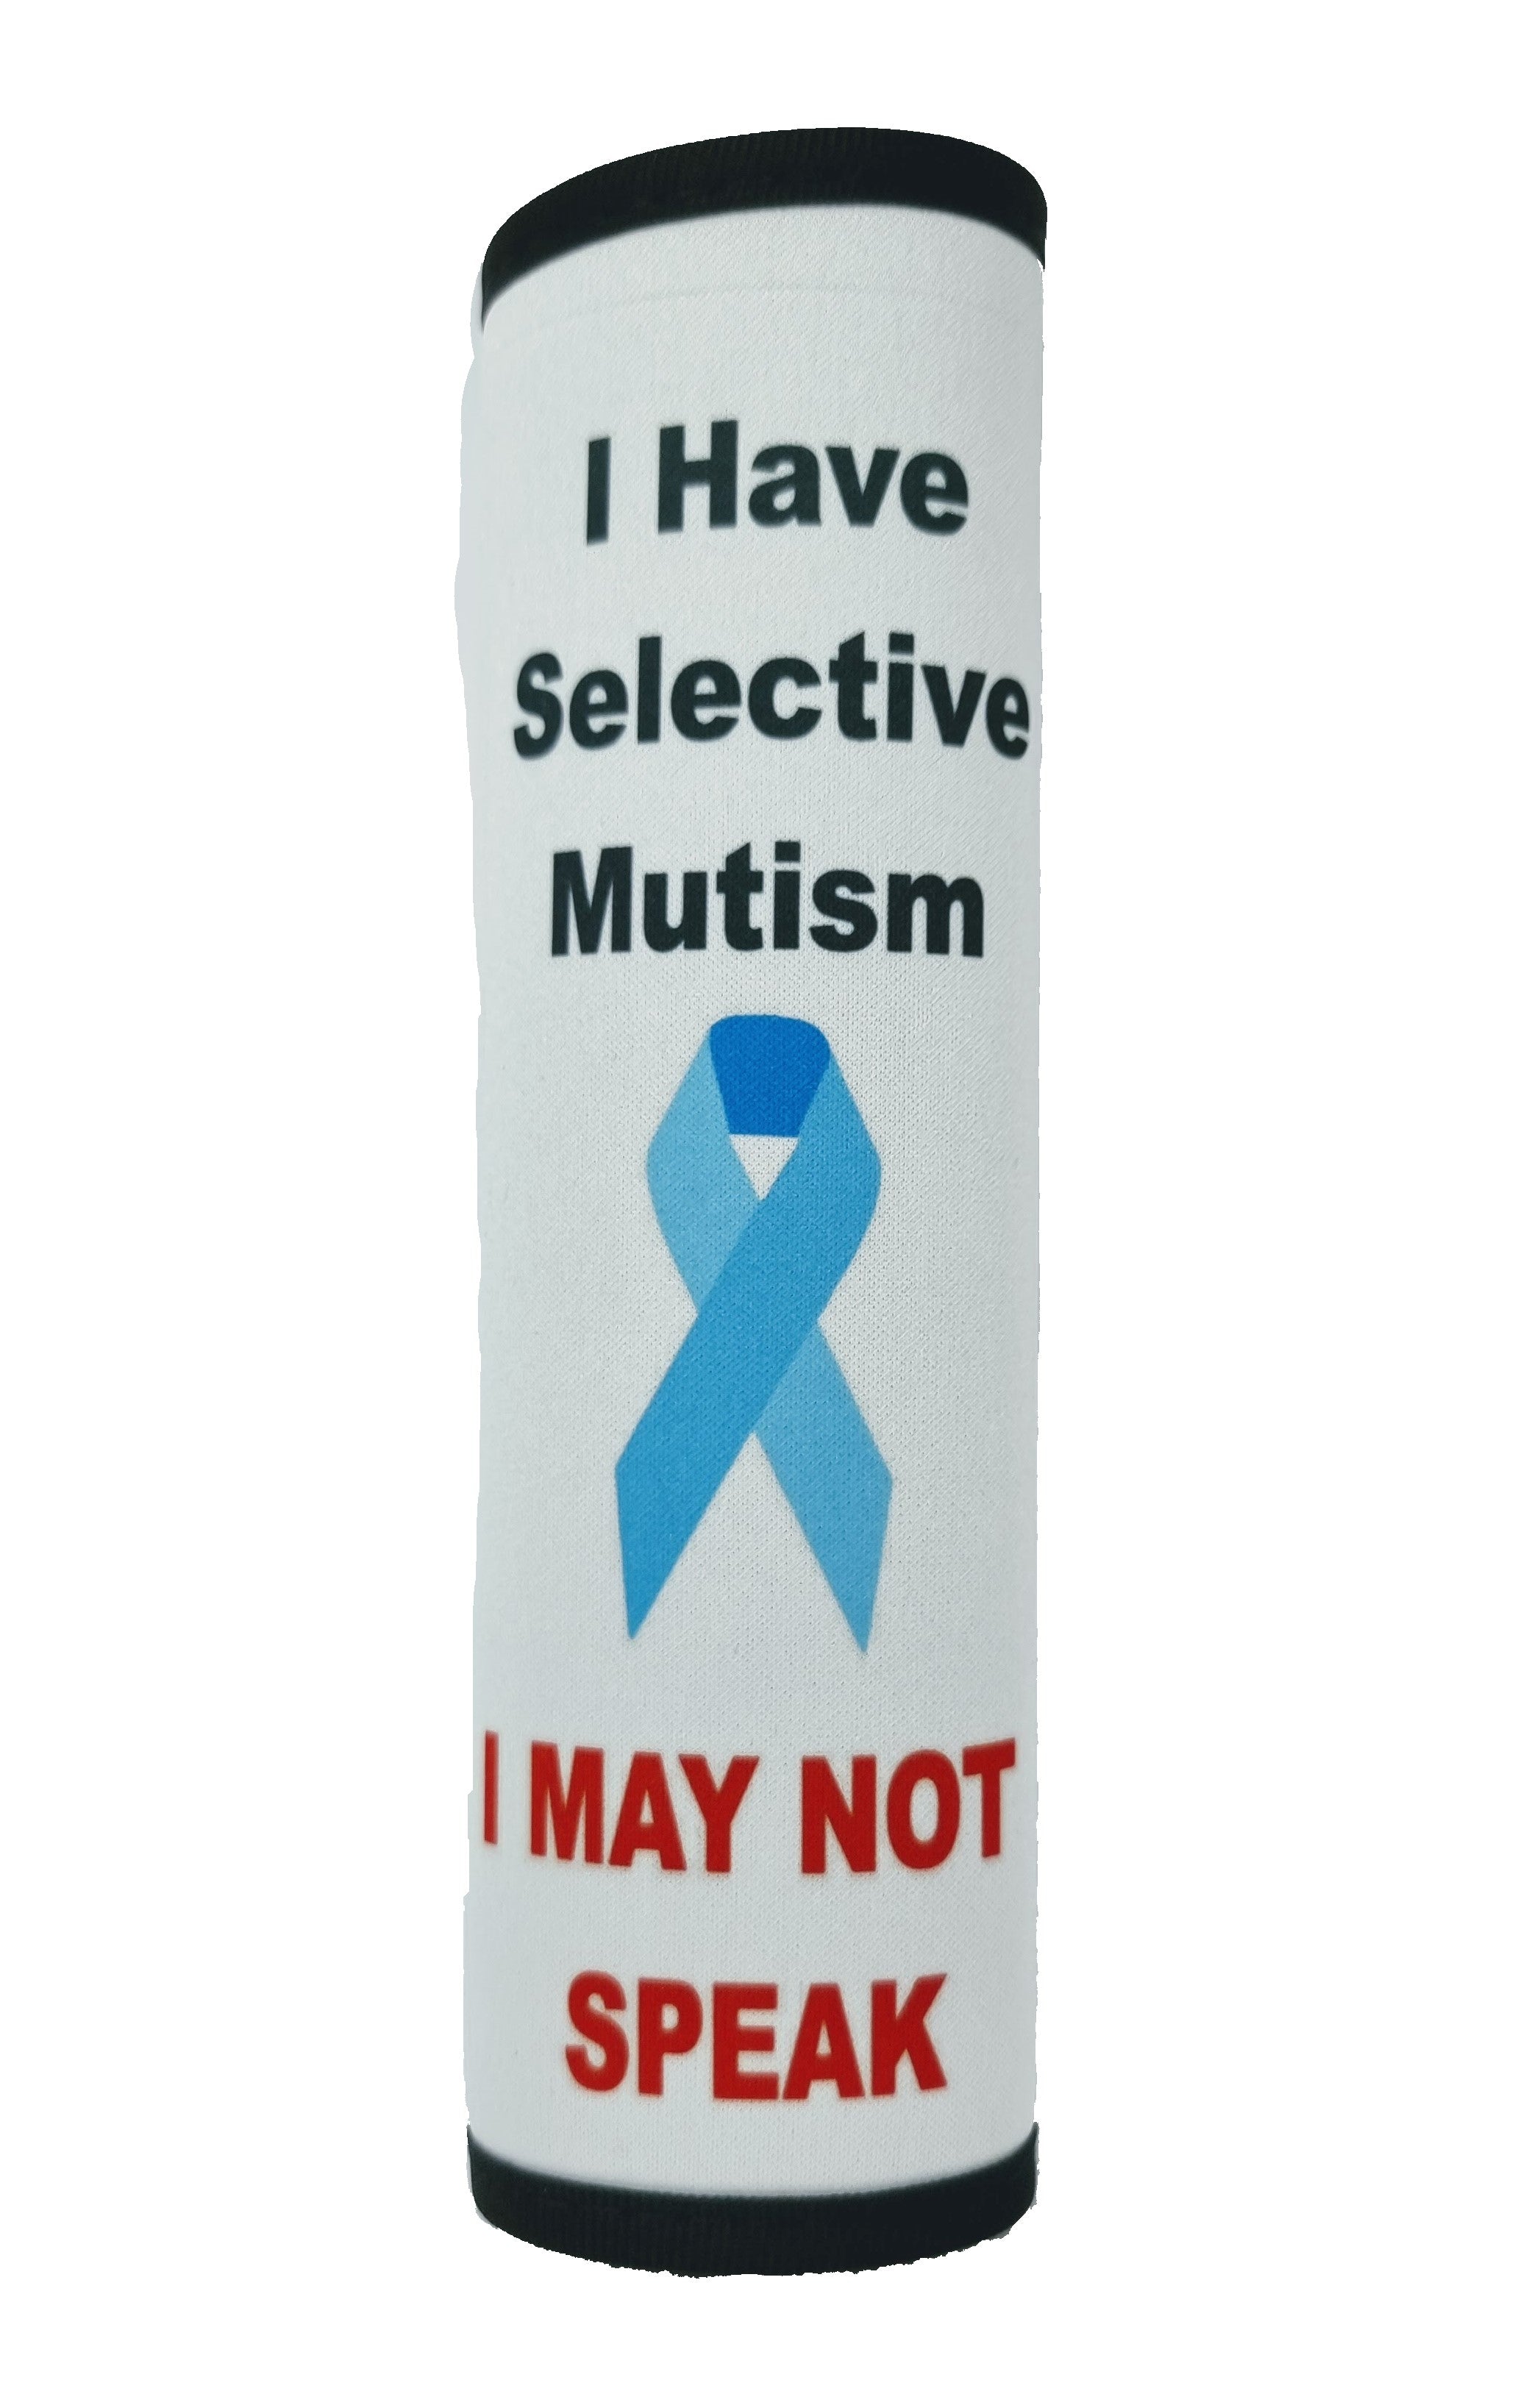 I have Selective Mutism